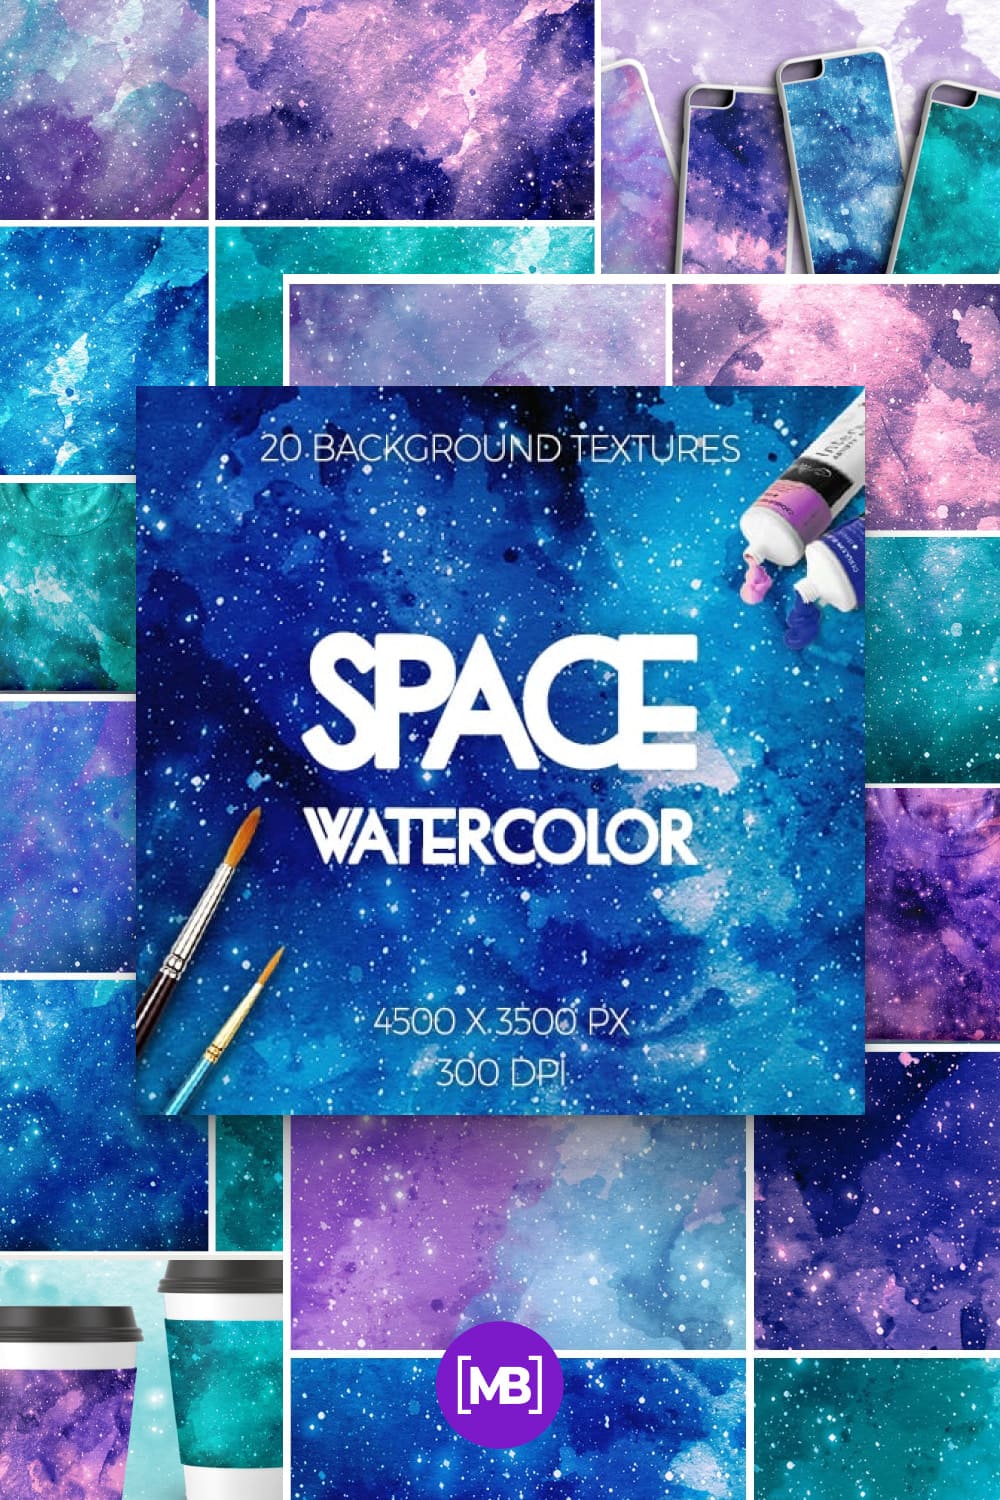 Watercolor Space Textures.